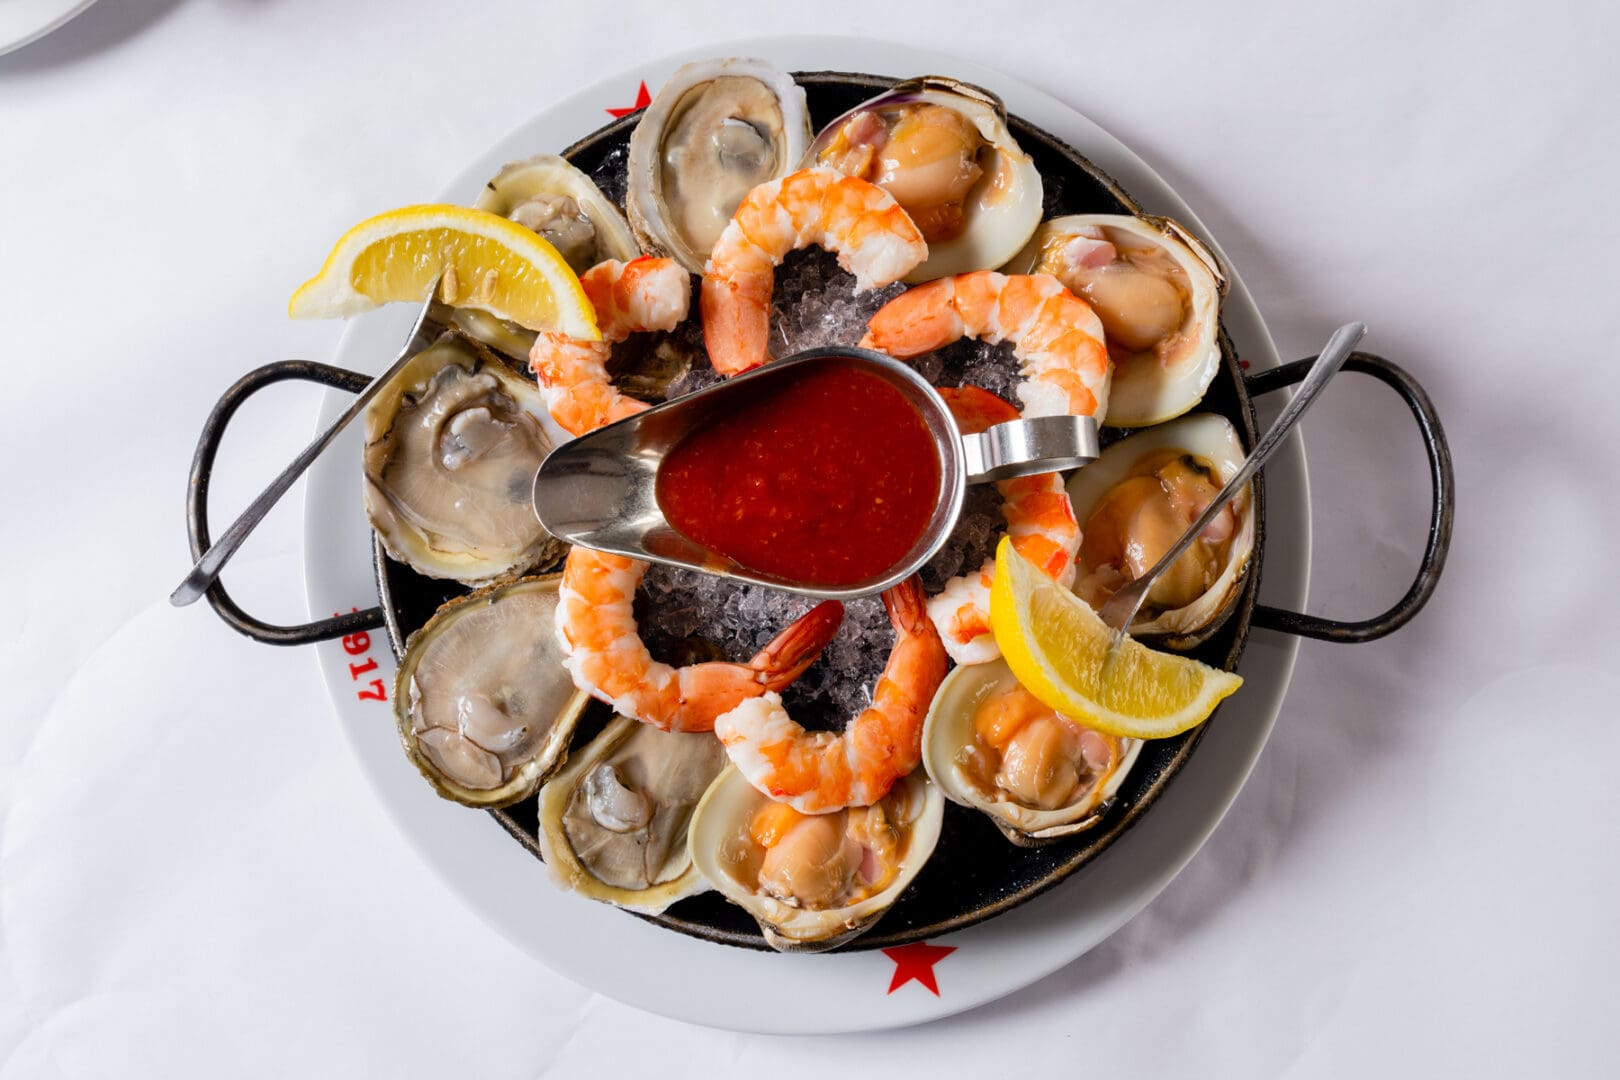 A plate of seafood with sauce and lemon.